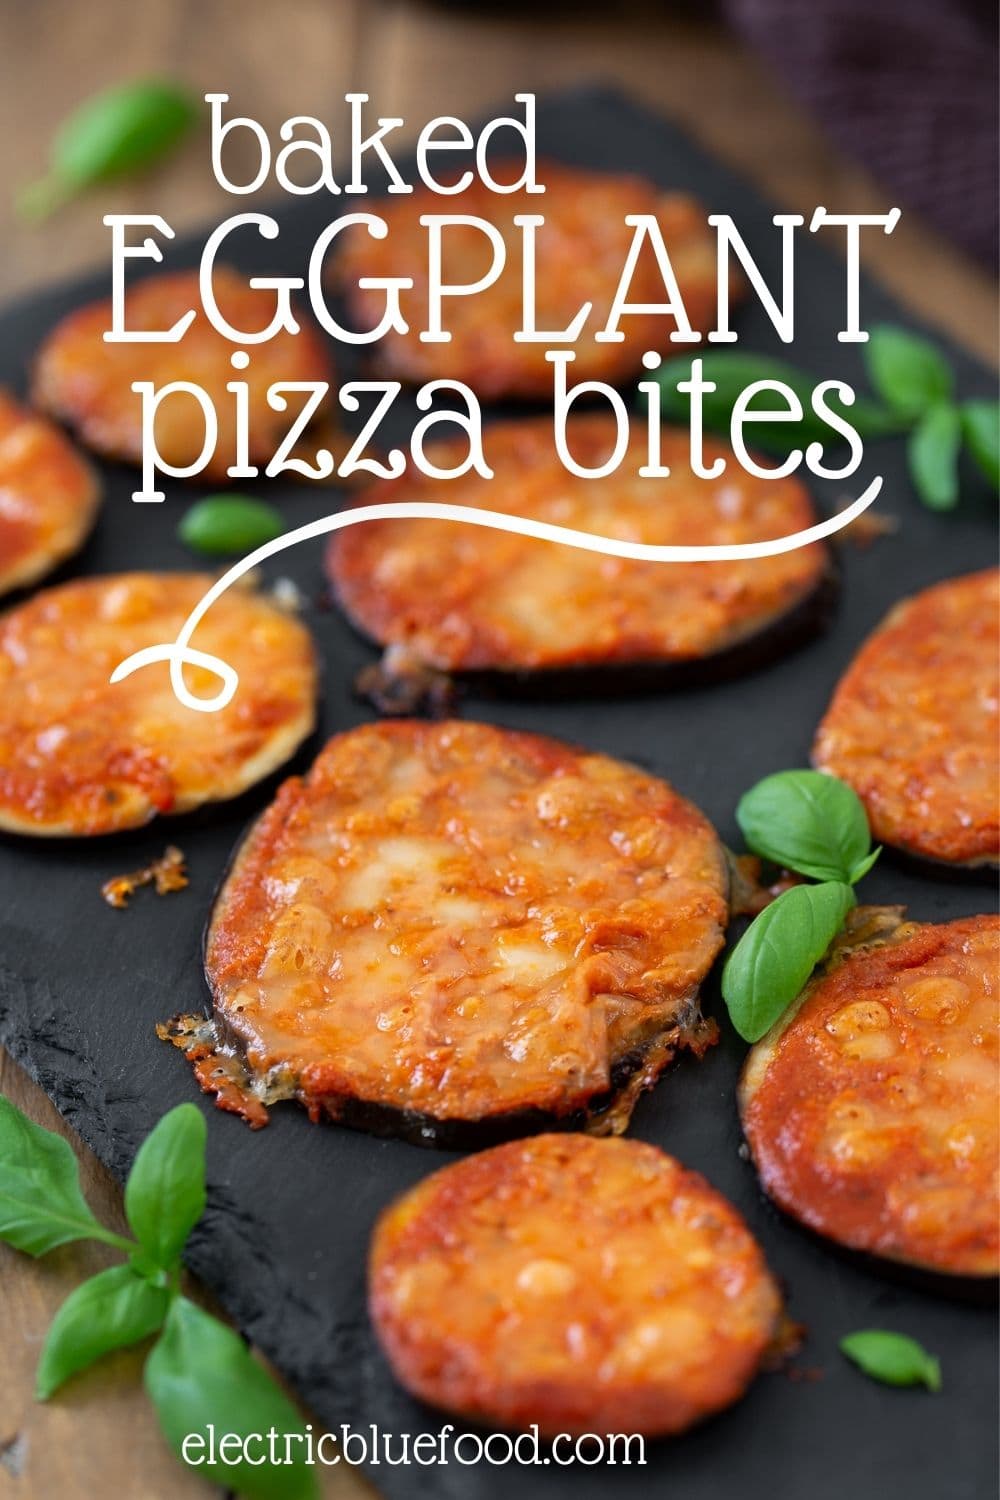 Baked eggplant pizzette are low-carb pizza on eggplant slices. Topped with homemade tomato sauce and fresh mozzarella, the perfect pizza flavoured snack.